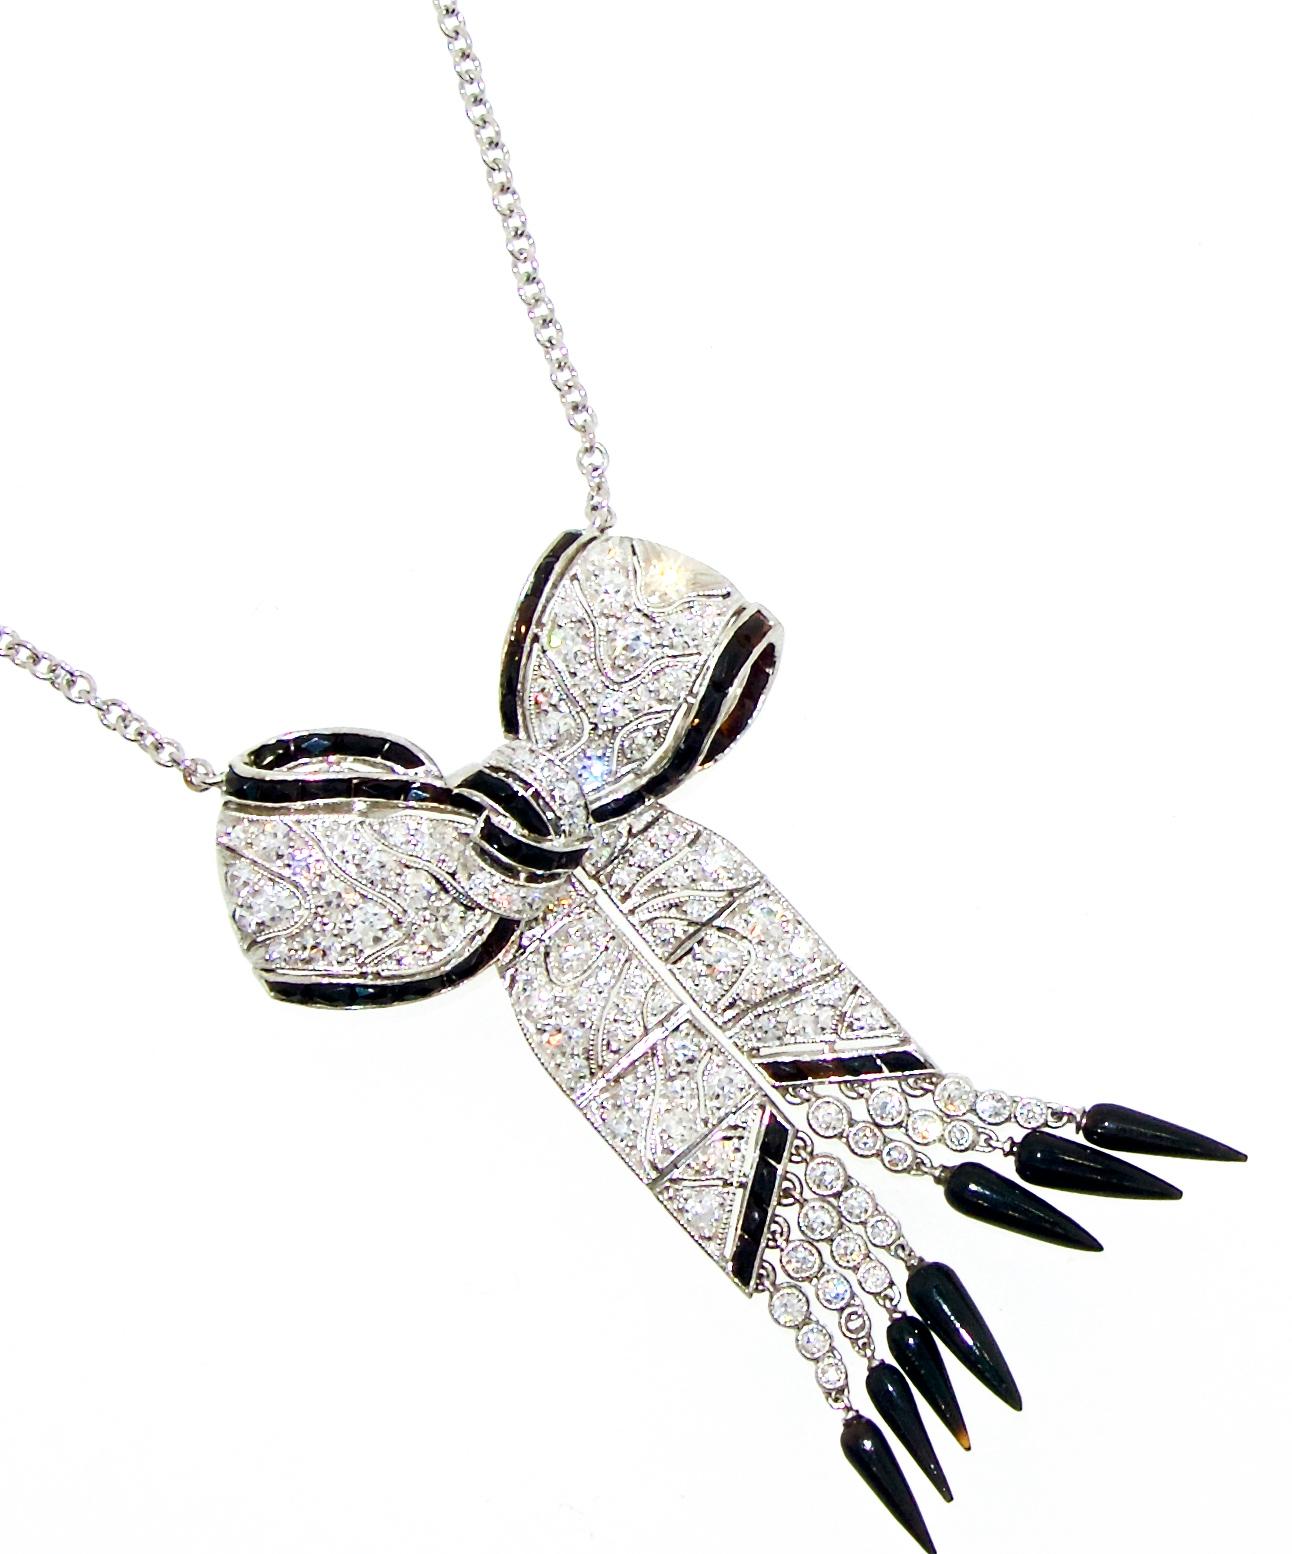 Platinum, diamond, onyx Art Deco necklace with fine white diamonds and fancy cut onyx.  The hanging elements are articulated, the platinum has a fine cut out design, the bow is 2 inches long and hangs from a 15 inch chain.  (This charming piece